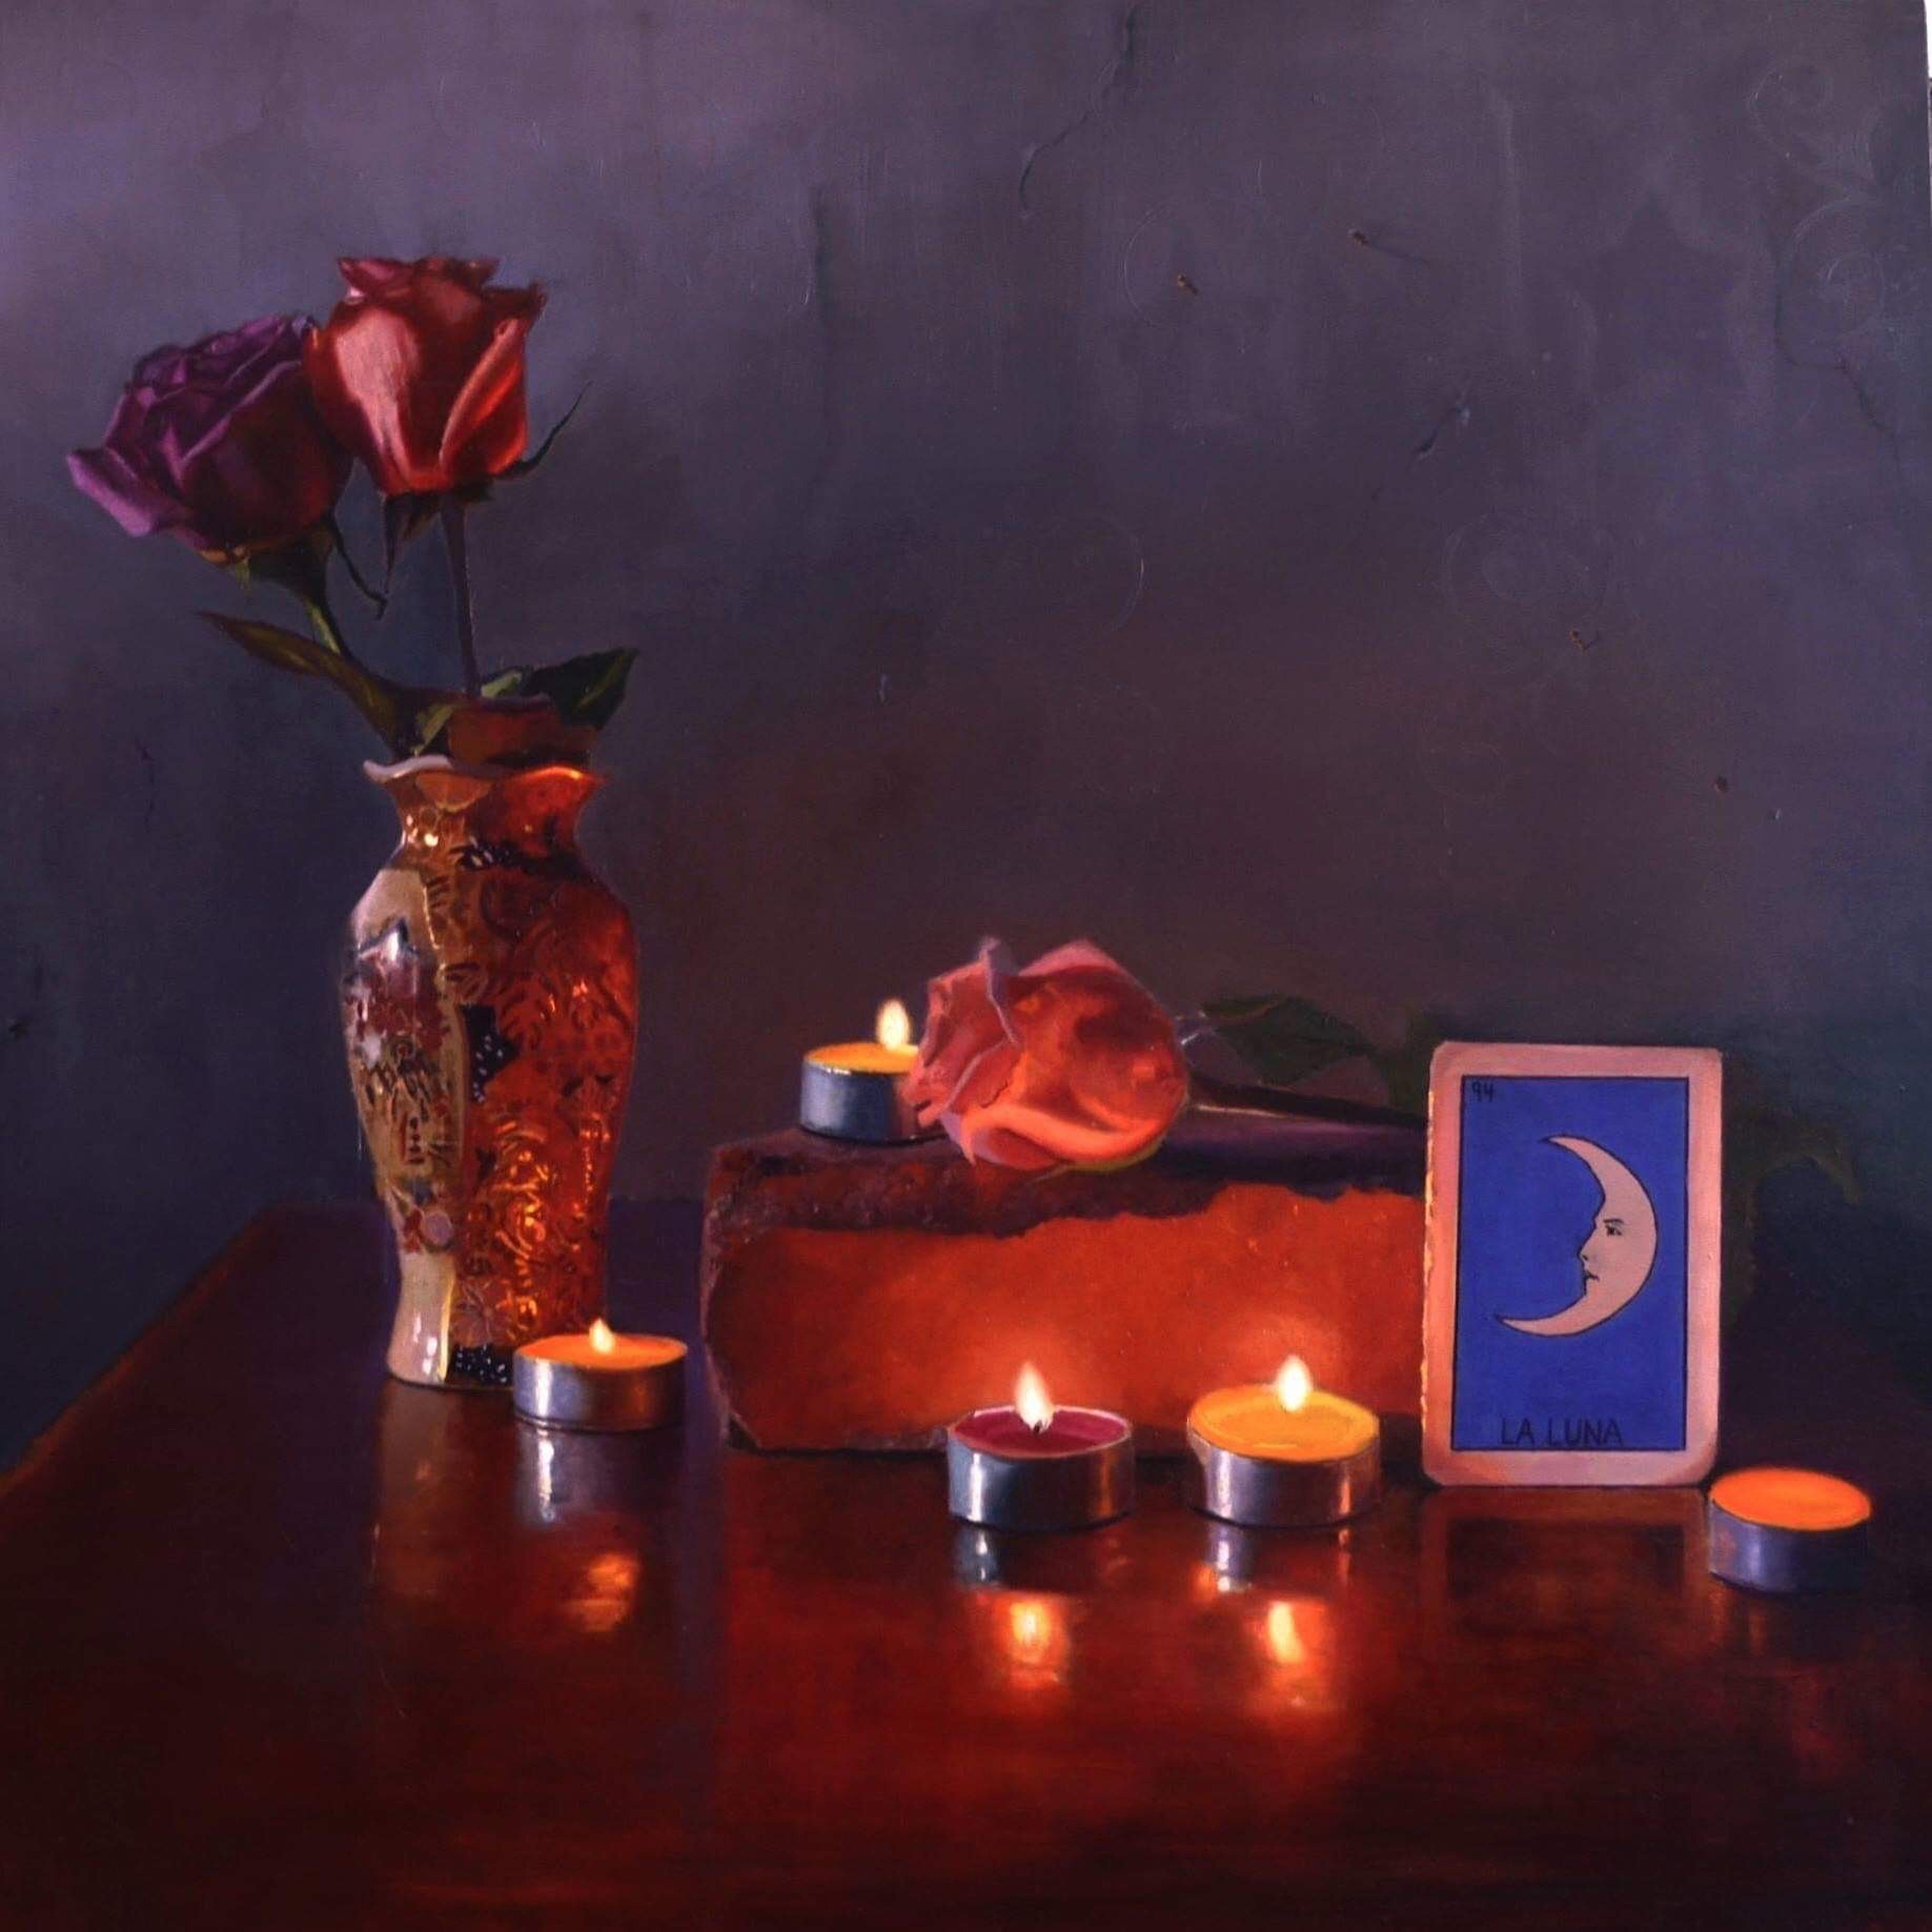 Scott Kiche Still-Life Painting - Rosas y Luna by Candlelight oil painting on aluminum still-life , Realism  